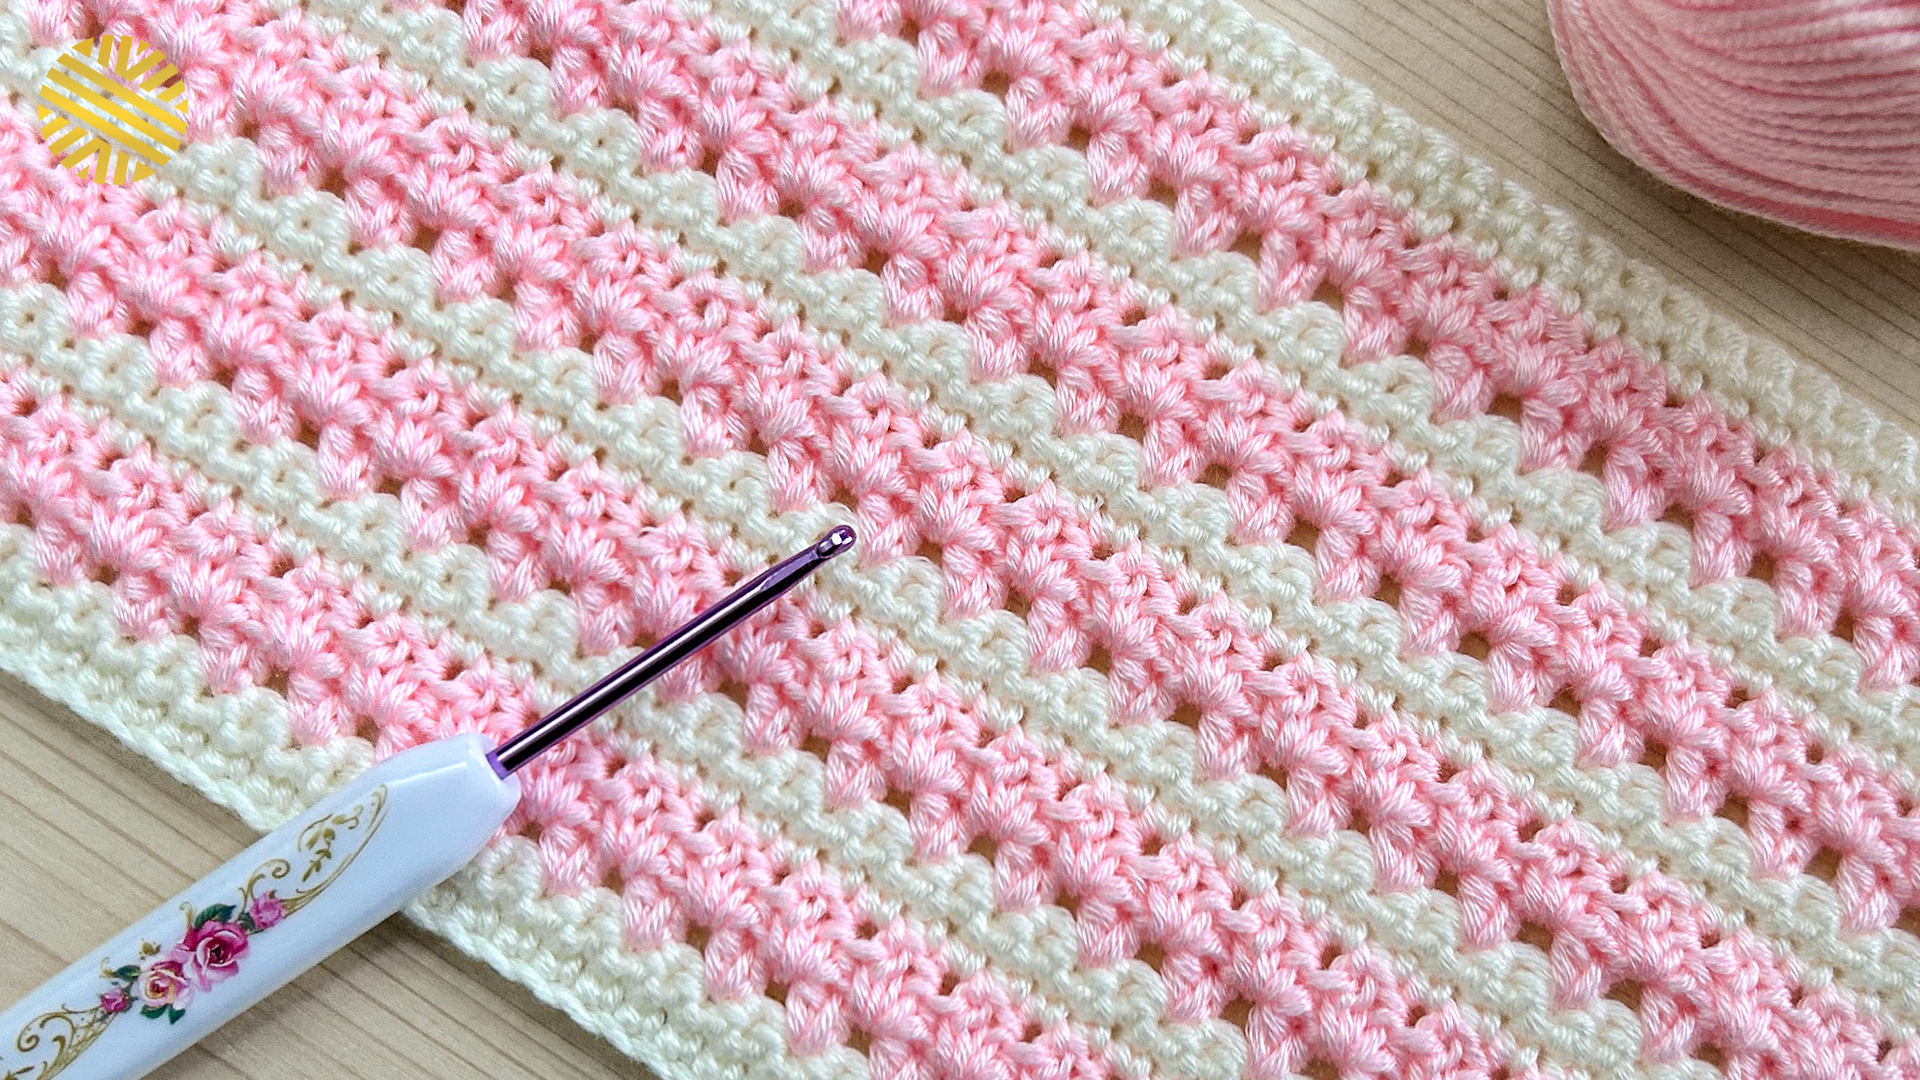 This Crochet Pattern for Beginners is SUPER-DUPER! Very Easy